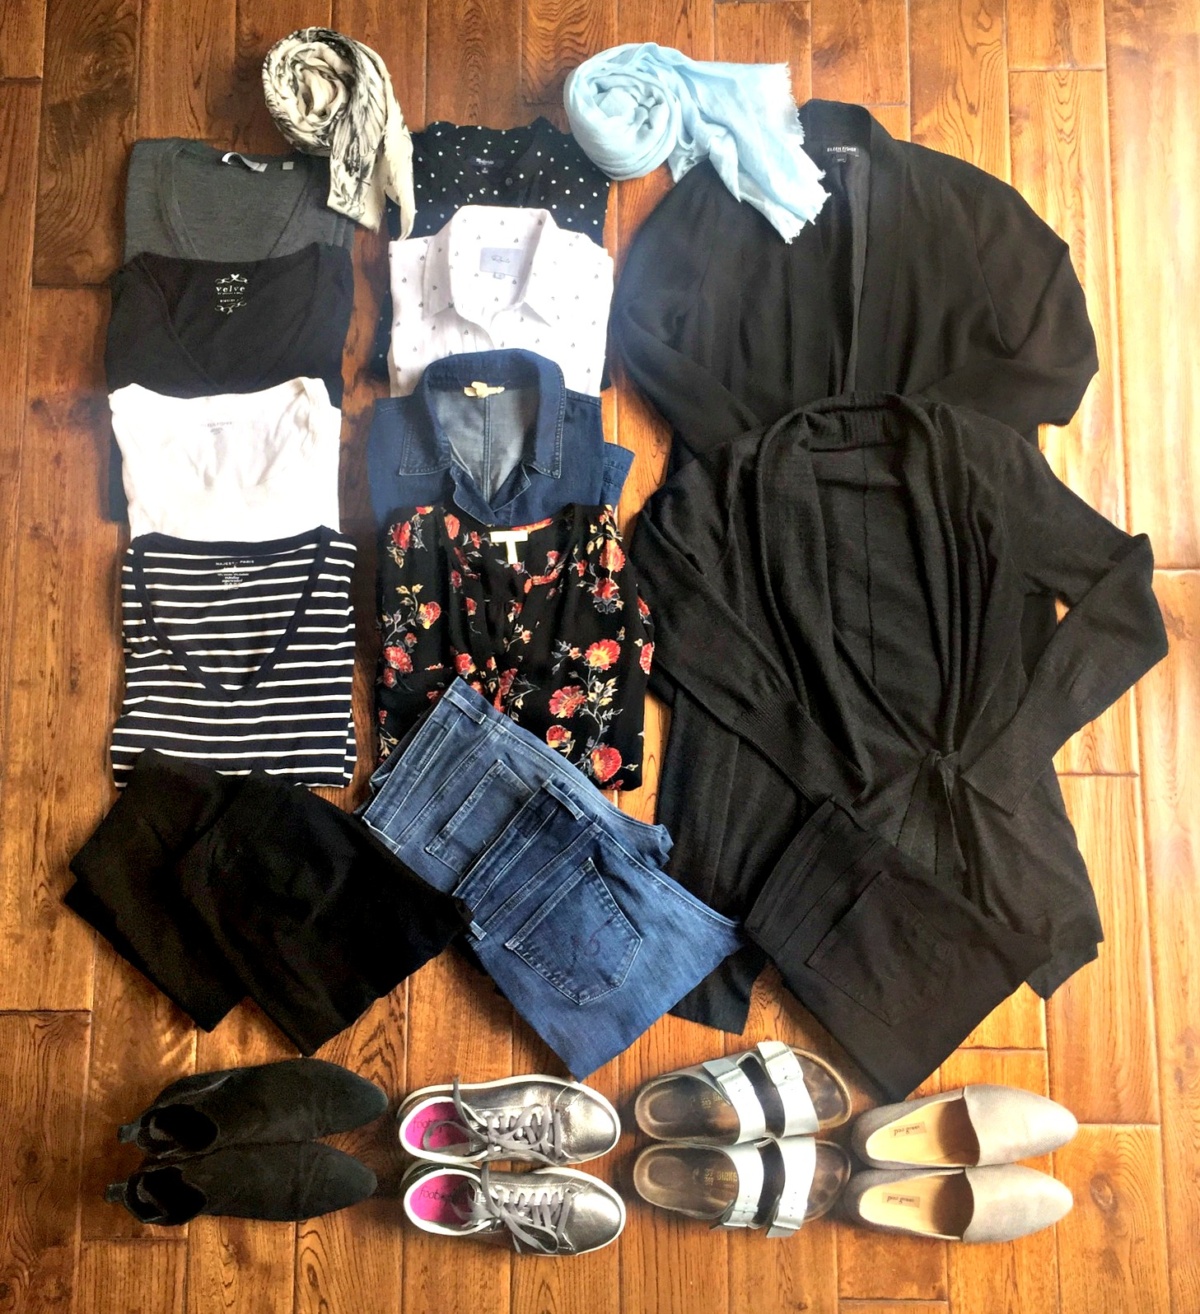 2 Week Travel Wardrobe for Spring. This wardrobe accommodates a wide range of temperatures and activities. Details at une femme d'un certain age.